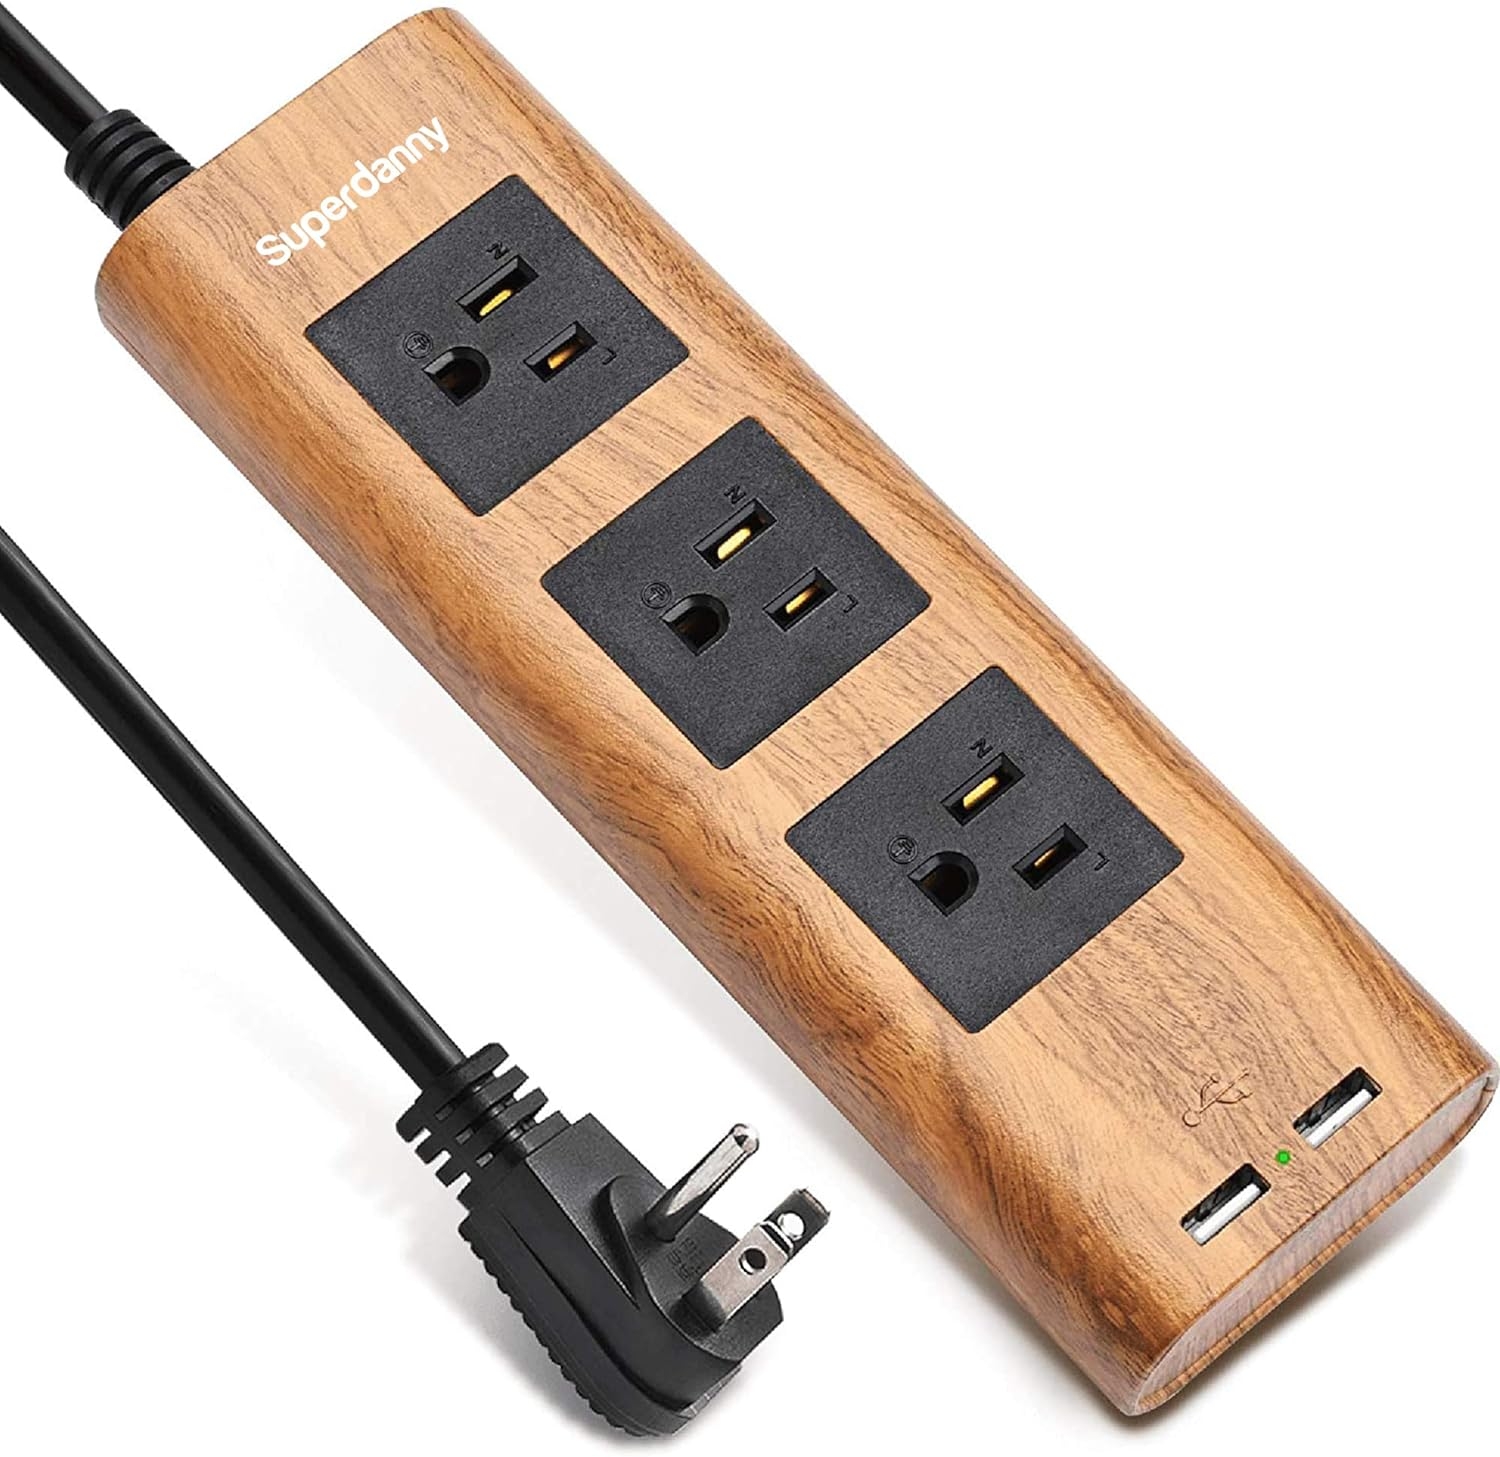 SUPERDANNY 9.8ft Surge Protector Power Strip Wood Grain Desktop Charging Station Extension Cord 3 Outlet 2 USB Fire-Retardant with Fastening Cable Tie for iPhone iPad Computer Home Office